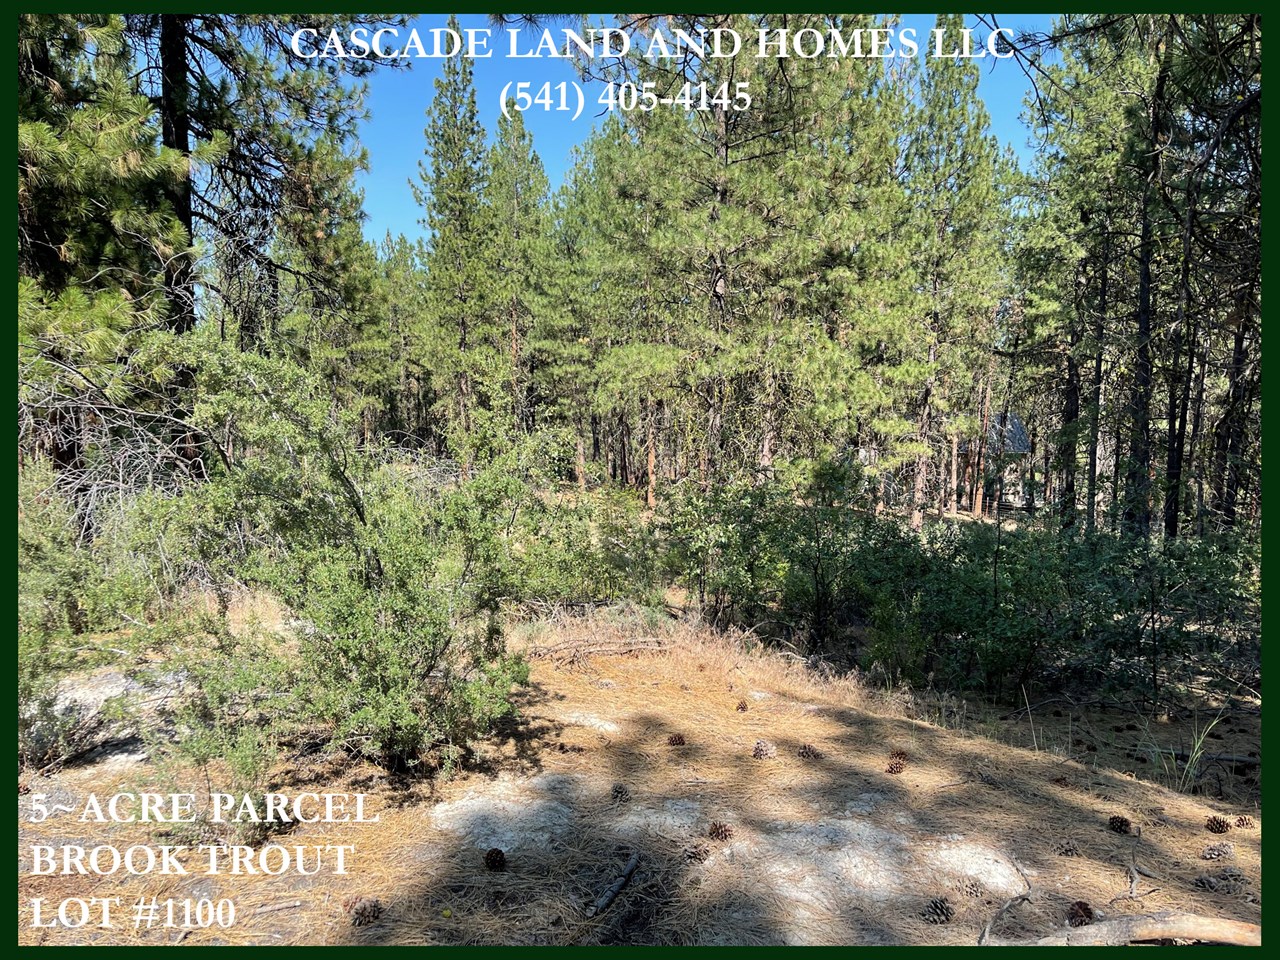 the property is heavily forested with pine and some juniper trees that offer privacy and a real feeling like you are out in the woods. when standing here you can smell the trees and hear the wind softly blow through them, the area is filled with wildlife and a feeling of freedom.